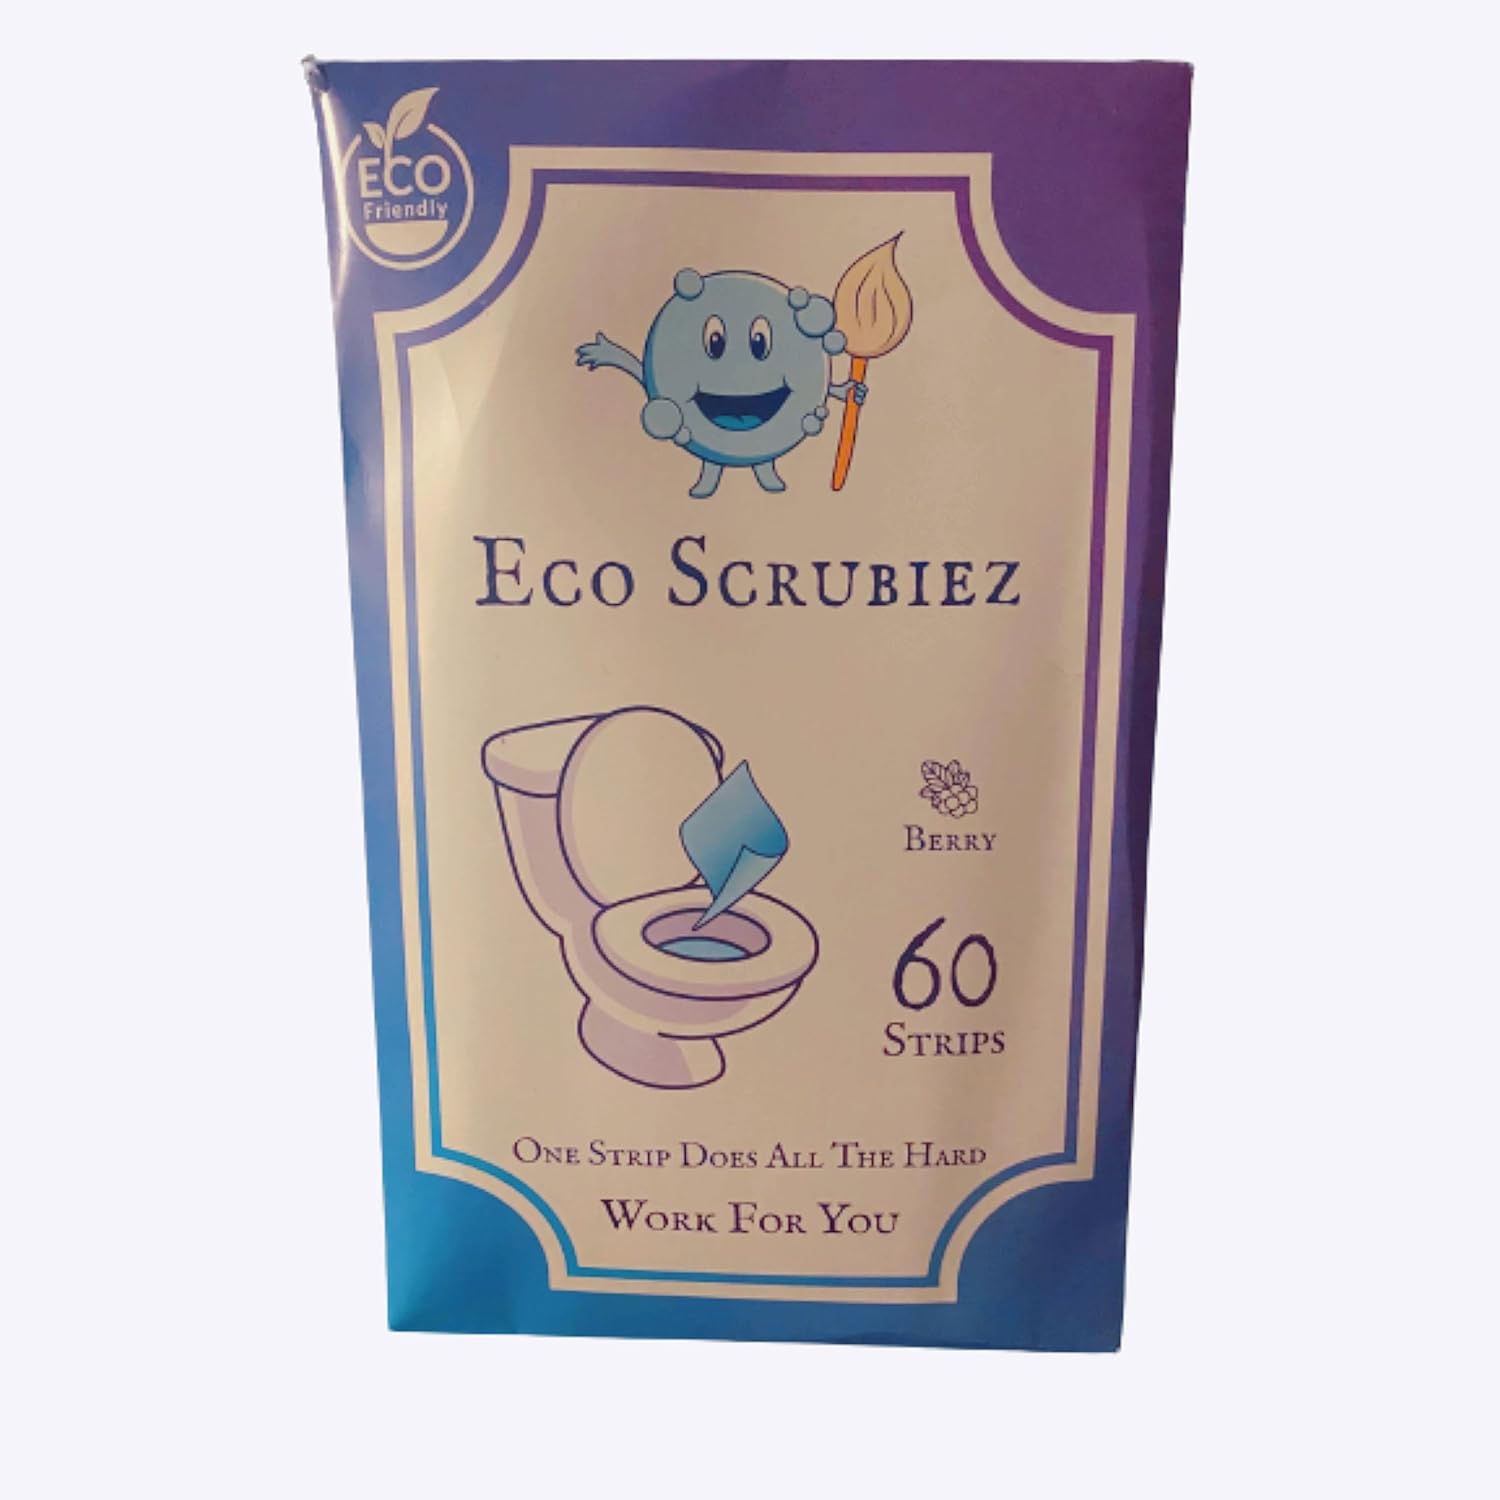 Eco Scrubiez Toilet Bowl Cleaning Strips Review